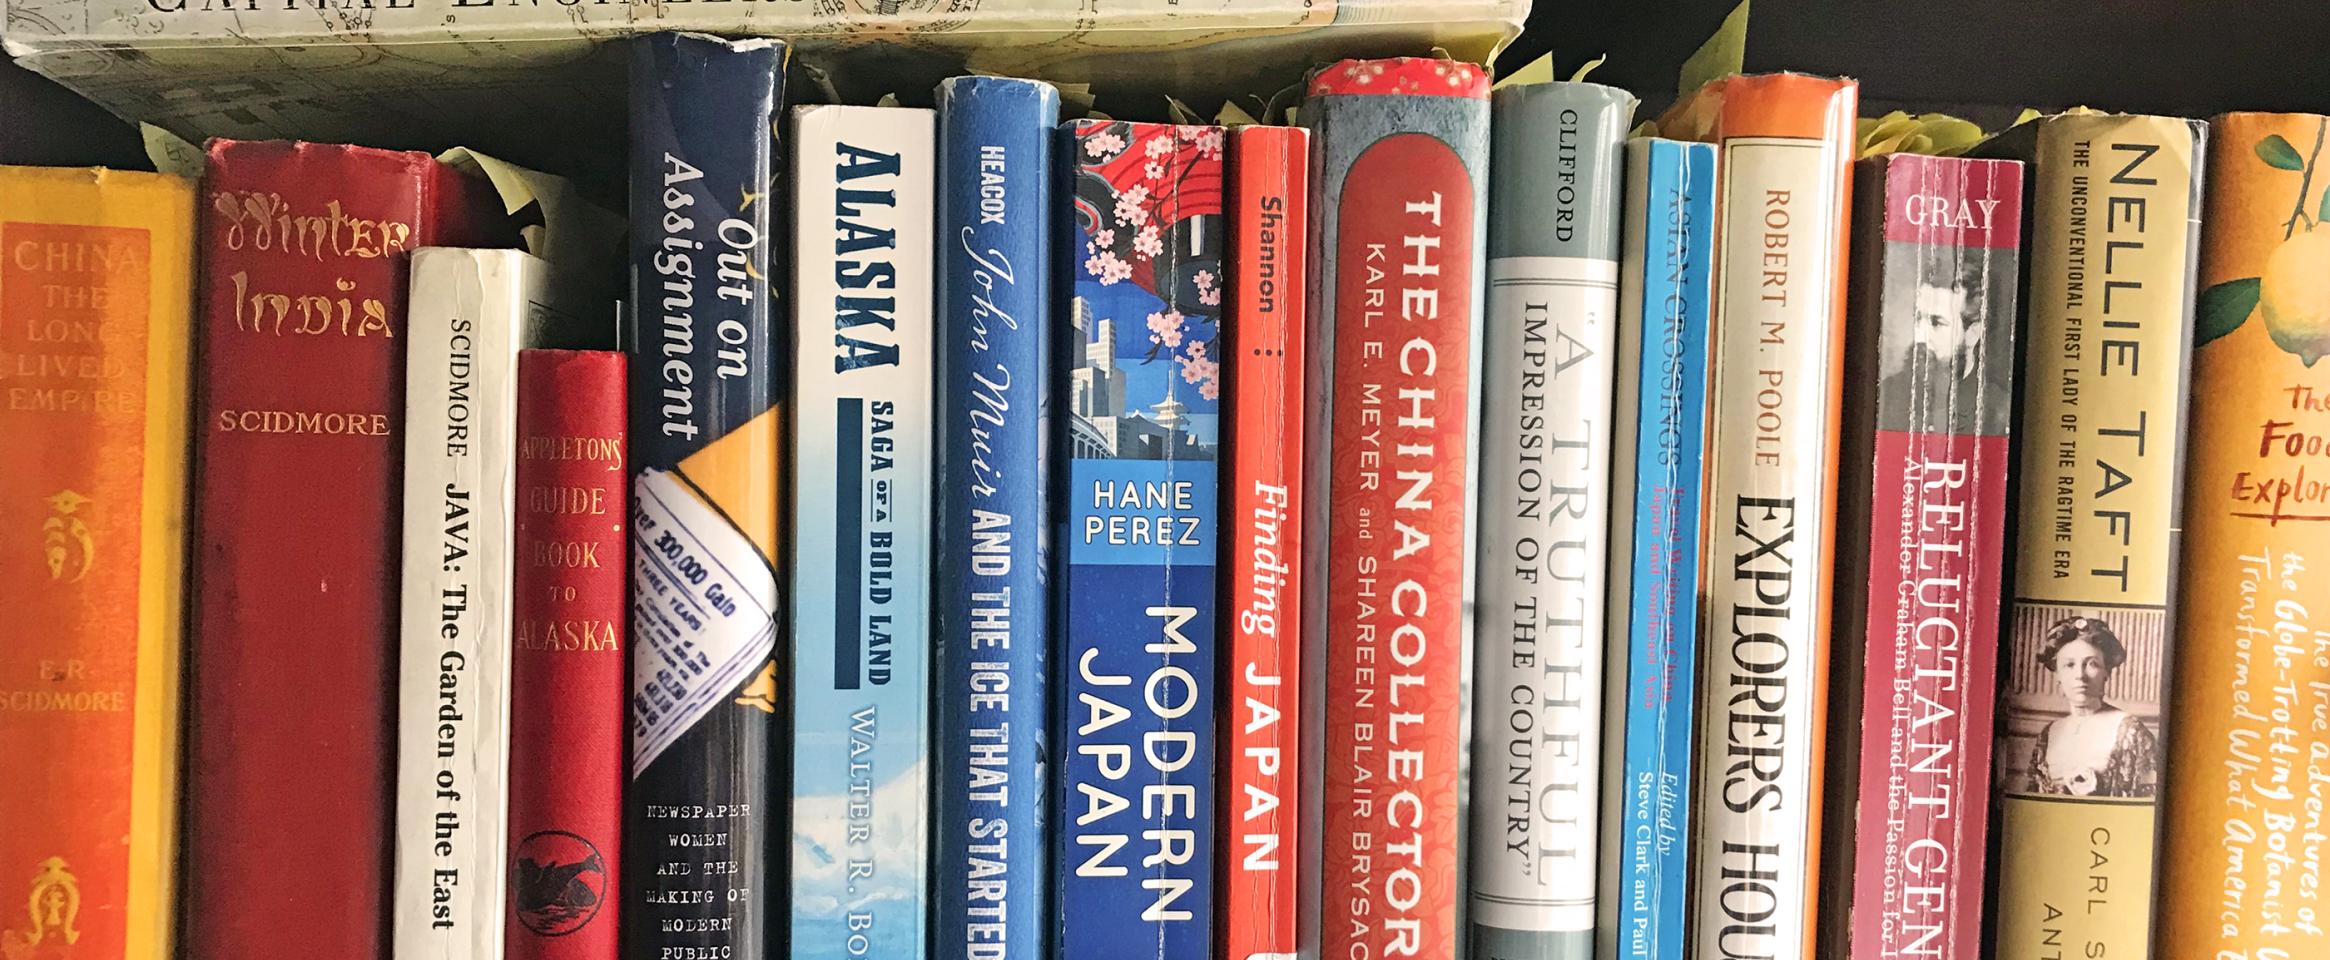 Horizontal photo of a shelf of books used by Diana P. Parsell for research on forthcoming book, "Eliza Scidmore: The Trailblazing Woman Behind Washington's Cherry Trees" Photo by Diana Parsell